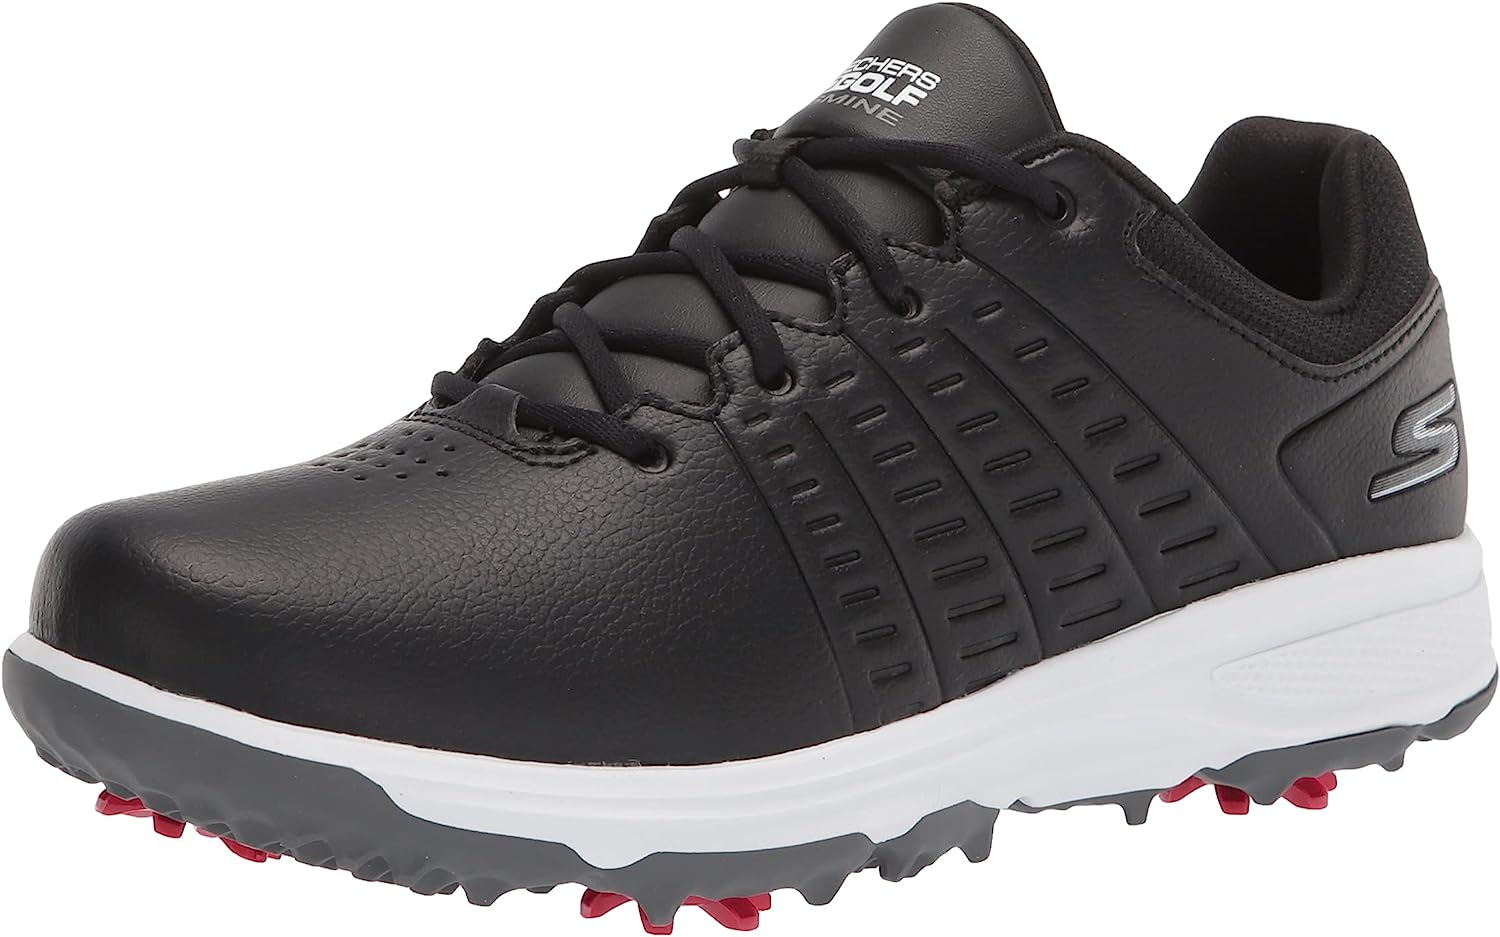 womens waterproof golf shoes product comparison